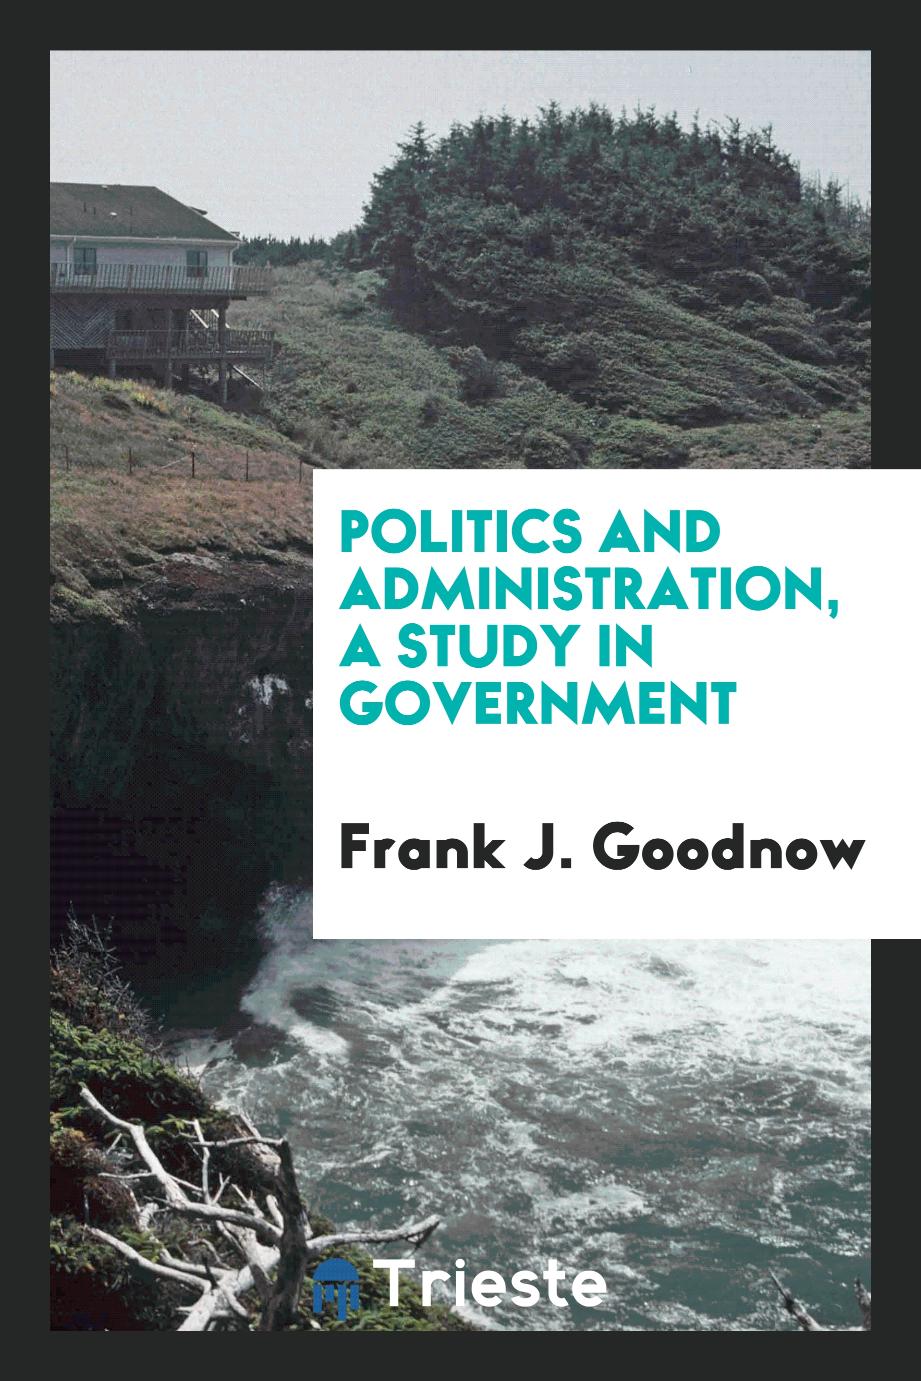 Politics and administration, a study in government